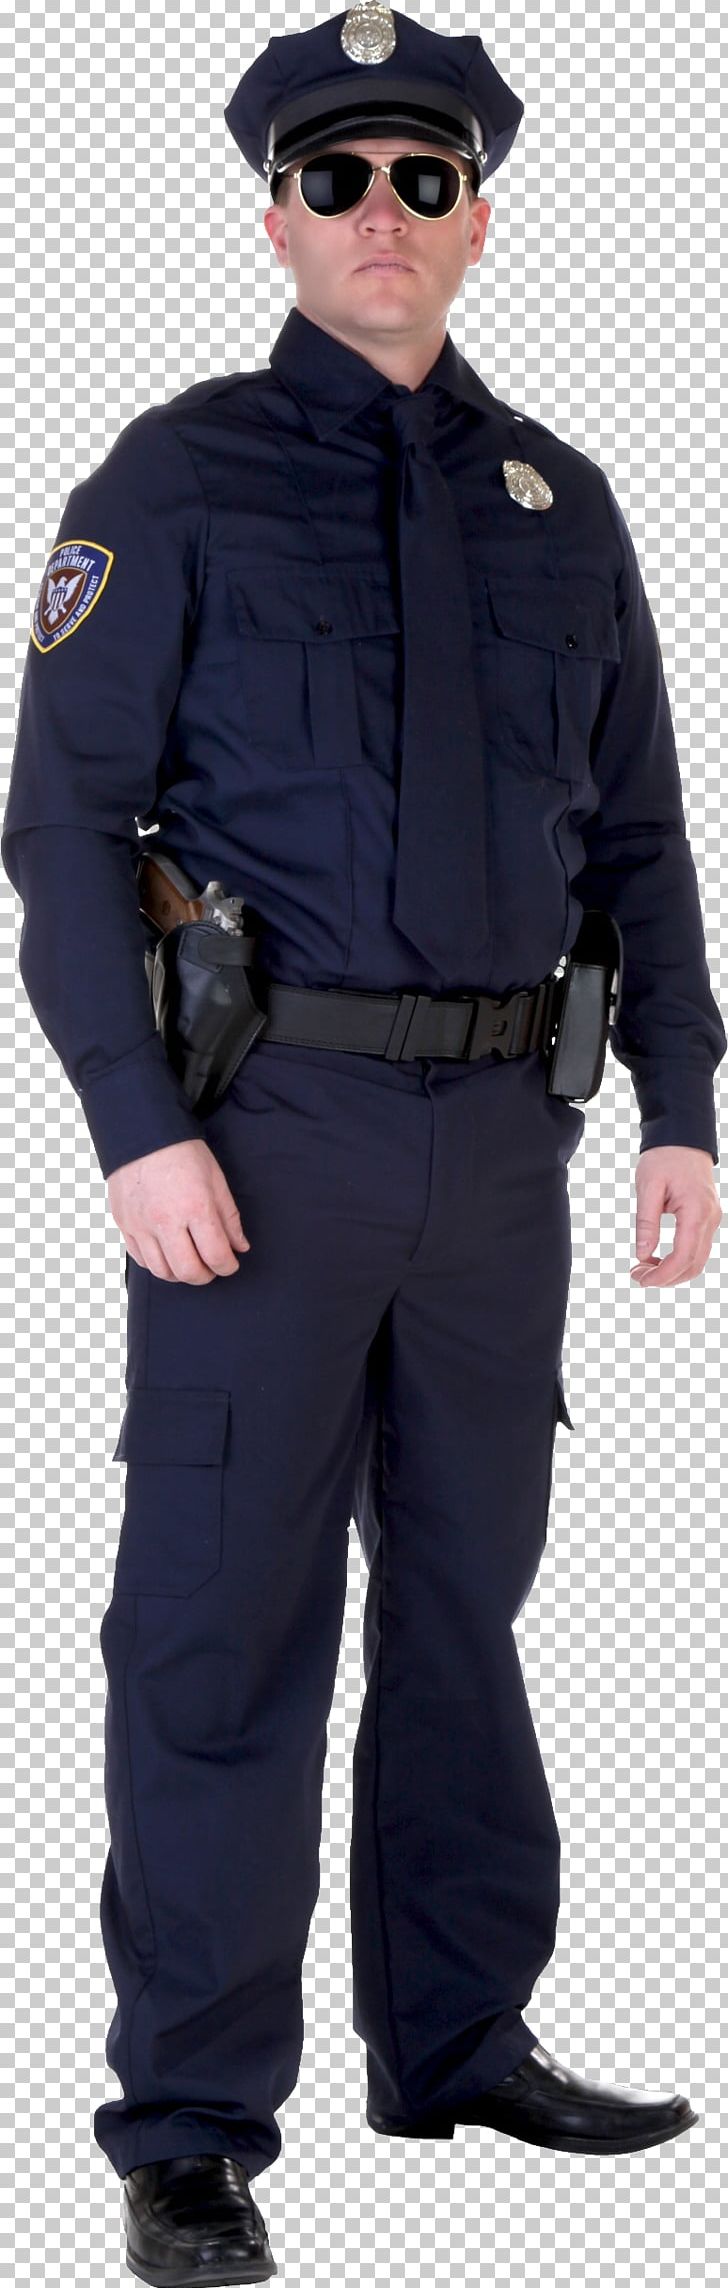 Couple Costume Police Officer Halloween Costume PNG, Clipart, Clothing, Costume, Free, Law Enforcement, Man Free PNG Download